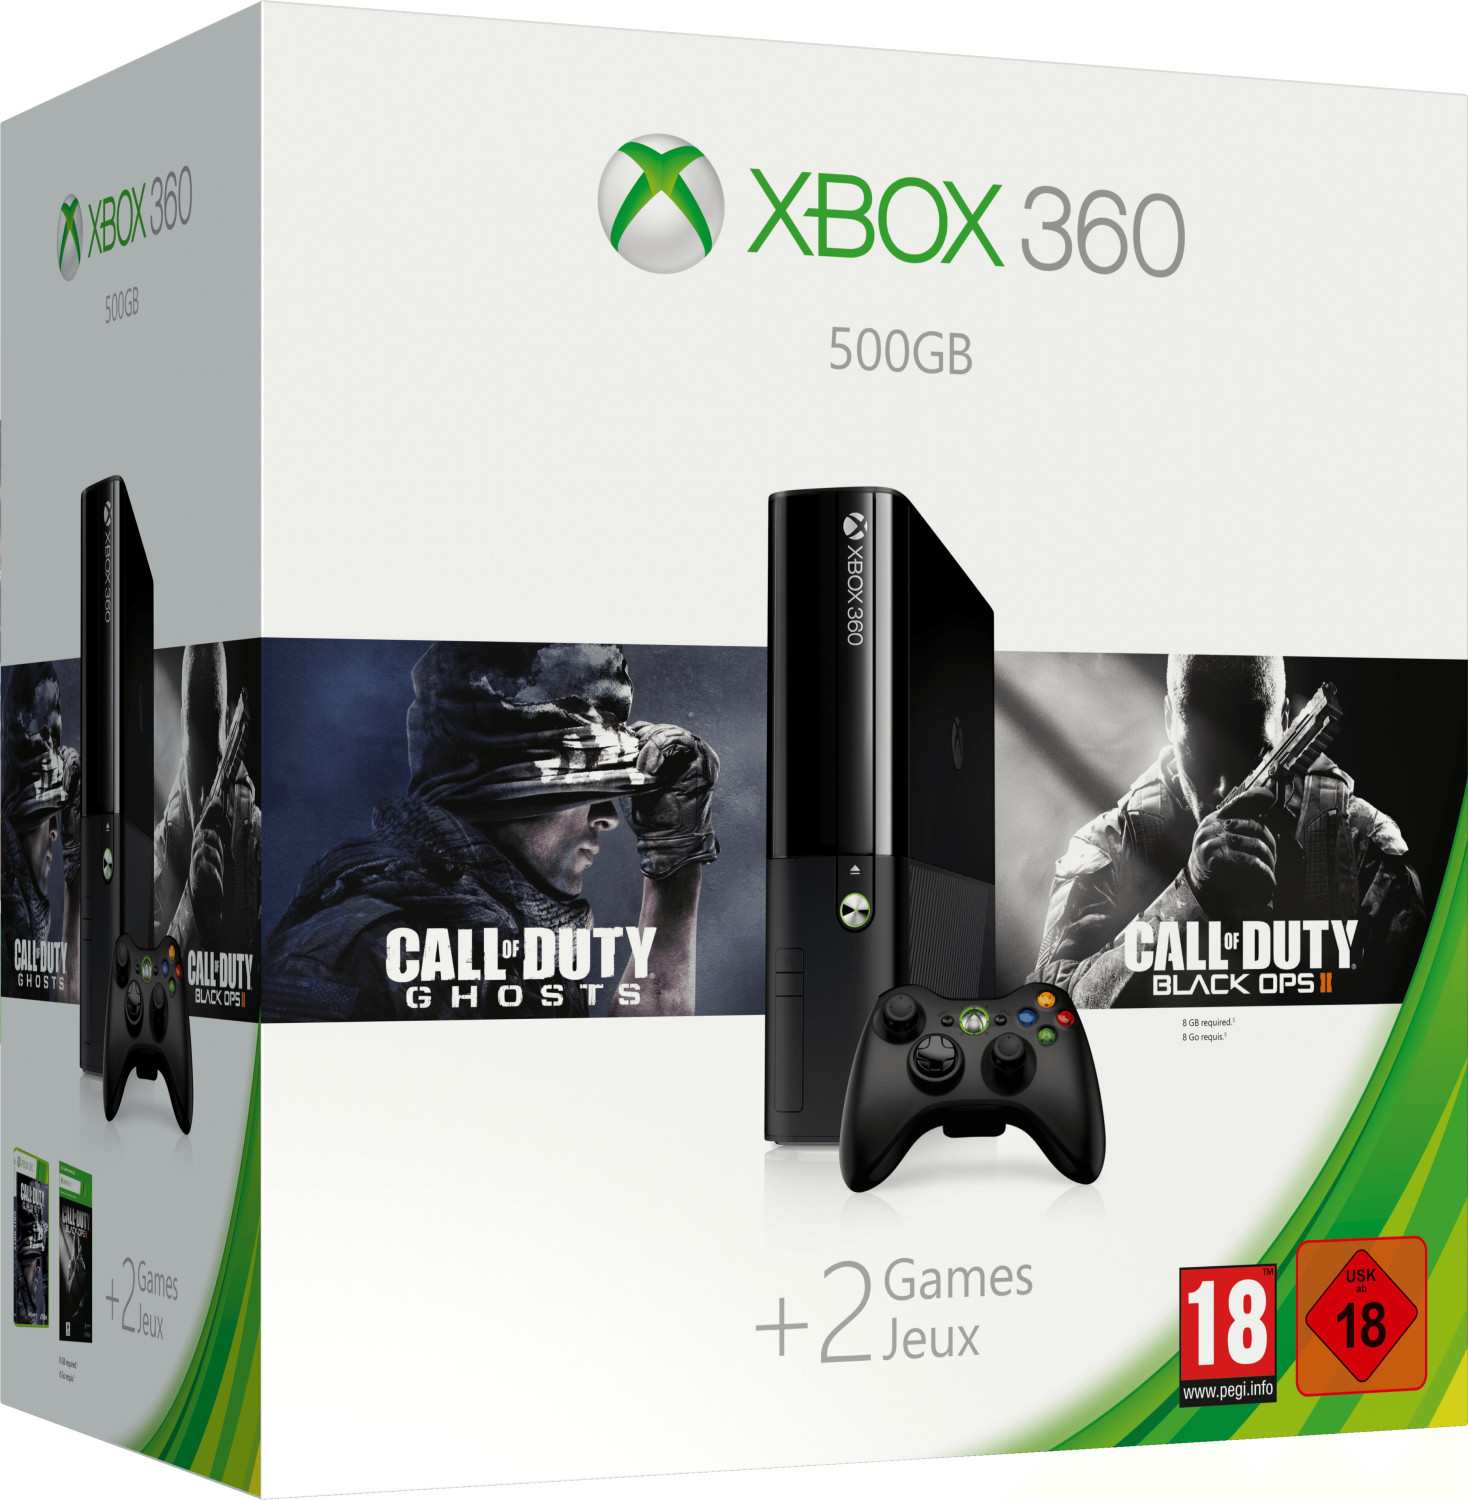 Microsoft Xbox 360 E 500GB - Call of Duty: Ghosts + Call of Duty: Black Ops 2